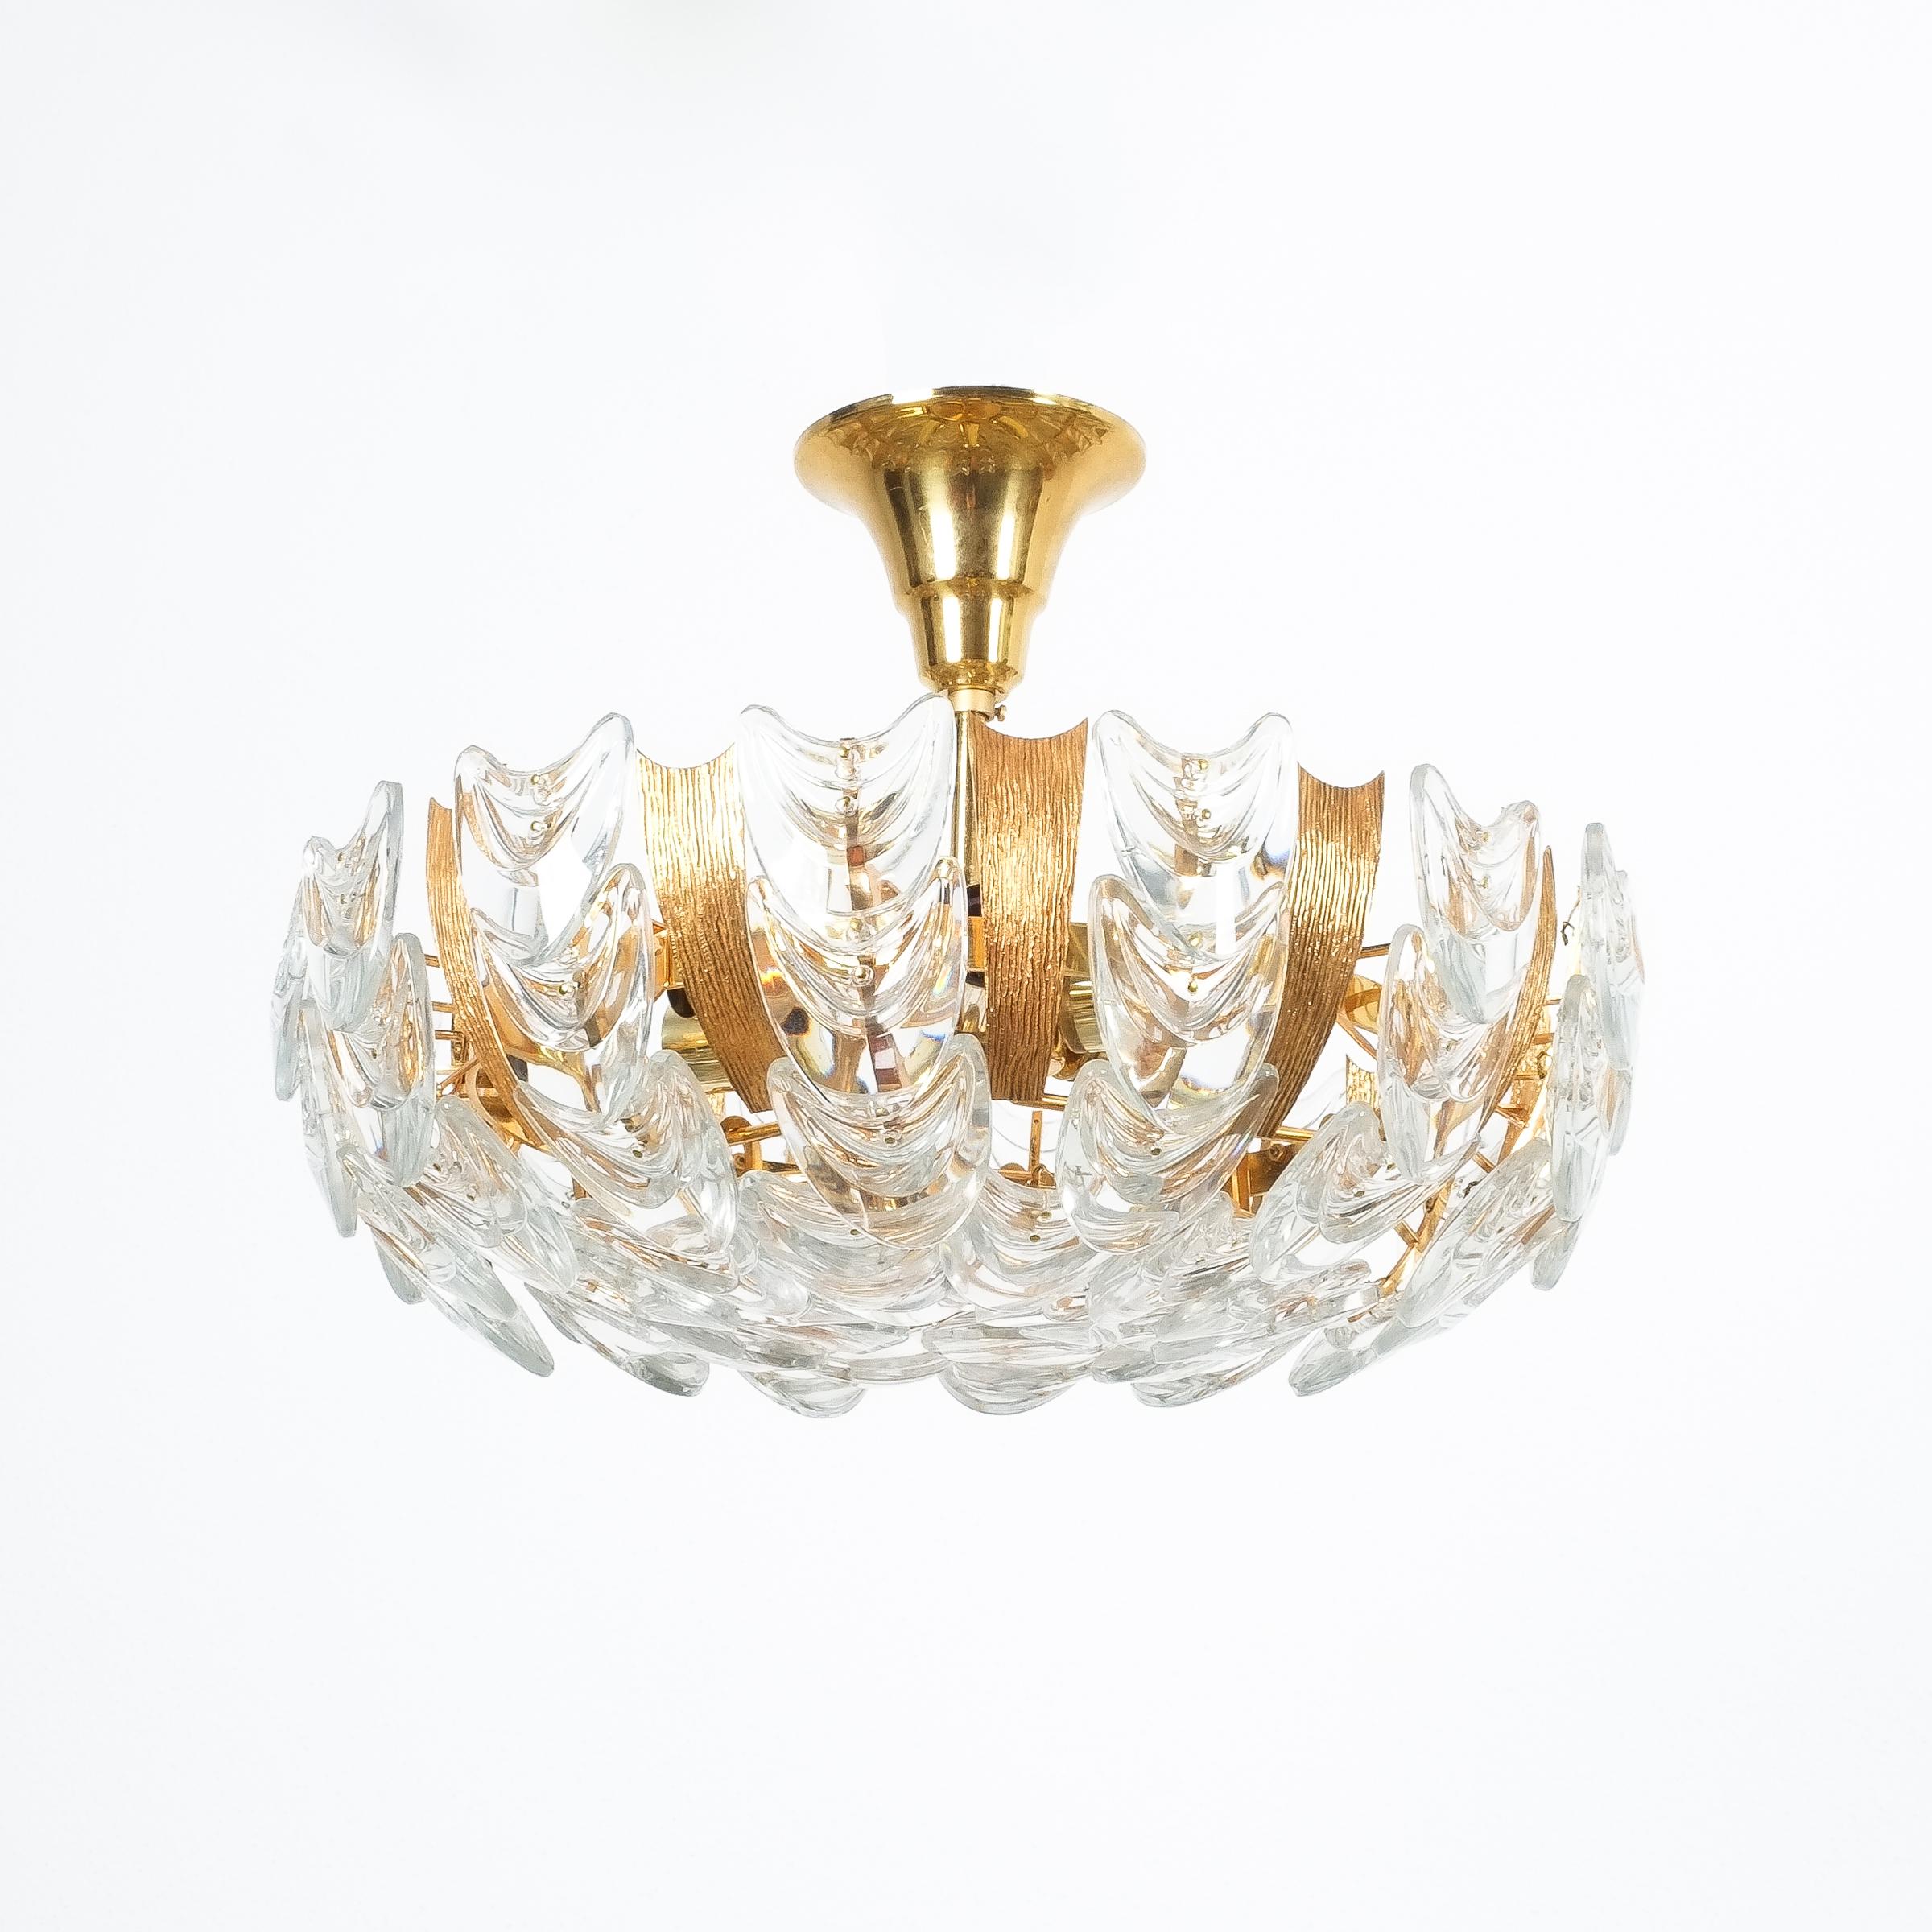 One of two Palwa gold brass and glass semi flush mounts, 1960- priced individually, per piece.

Beautiful Palwa gold brass and glass flush mount, circa 1960. Measuring 15.8